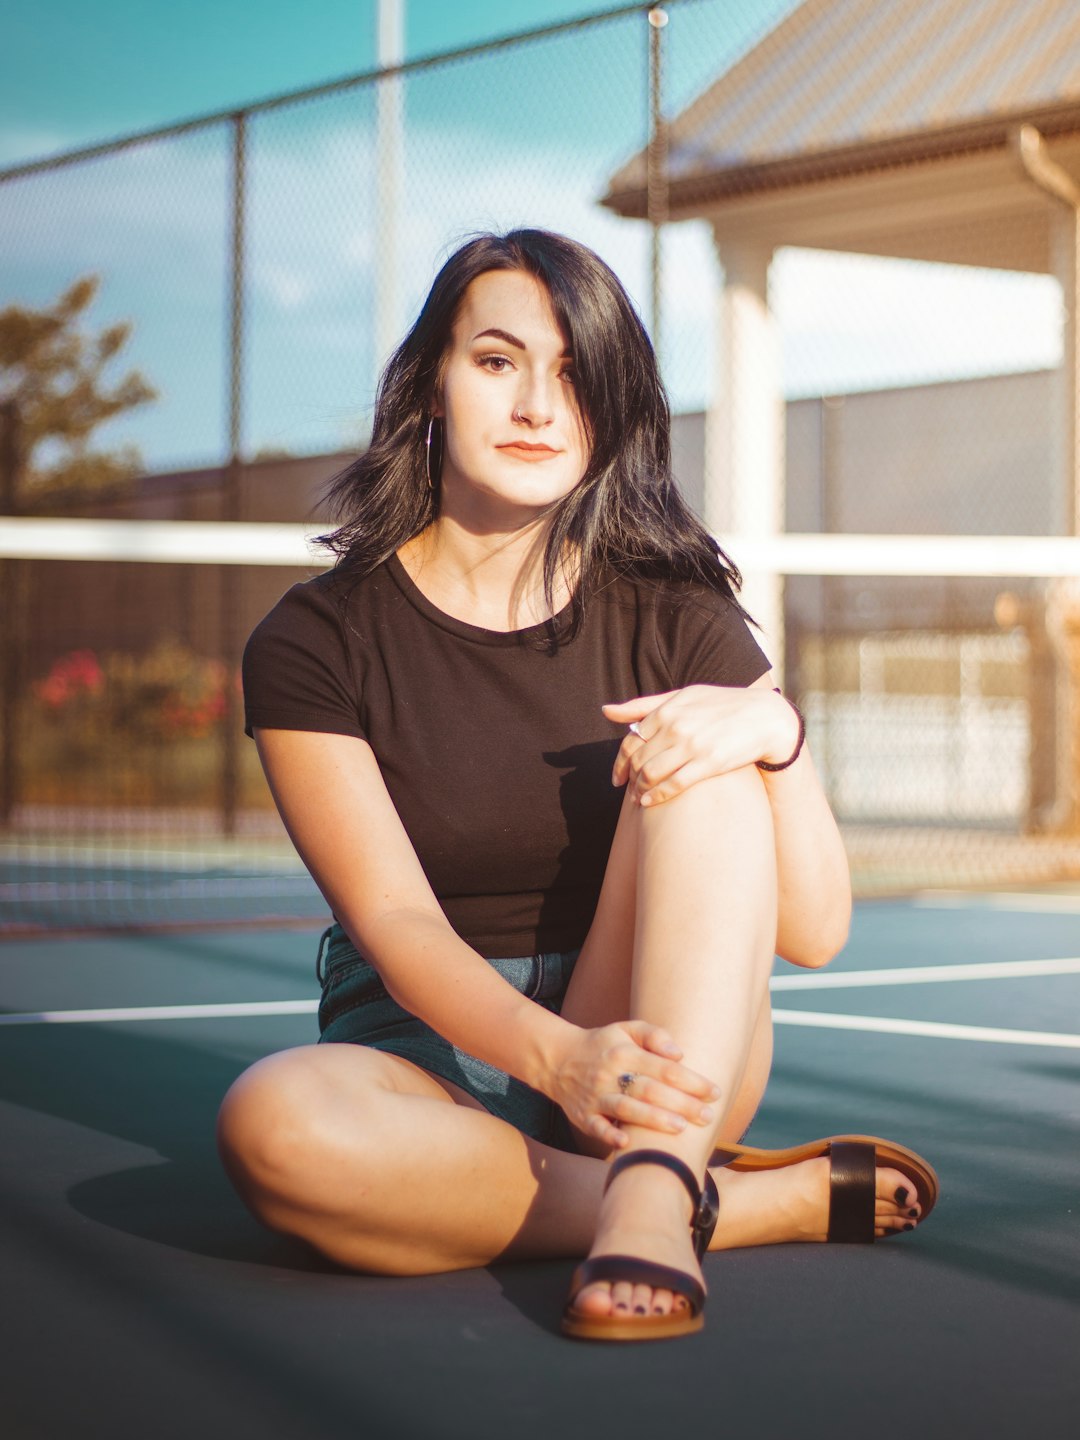 woman sits on tennis court